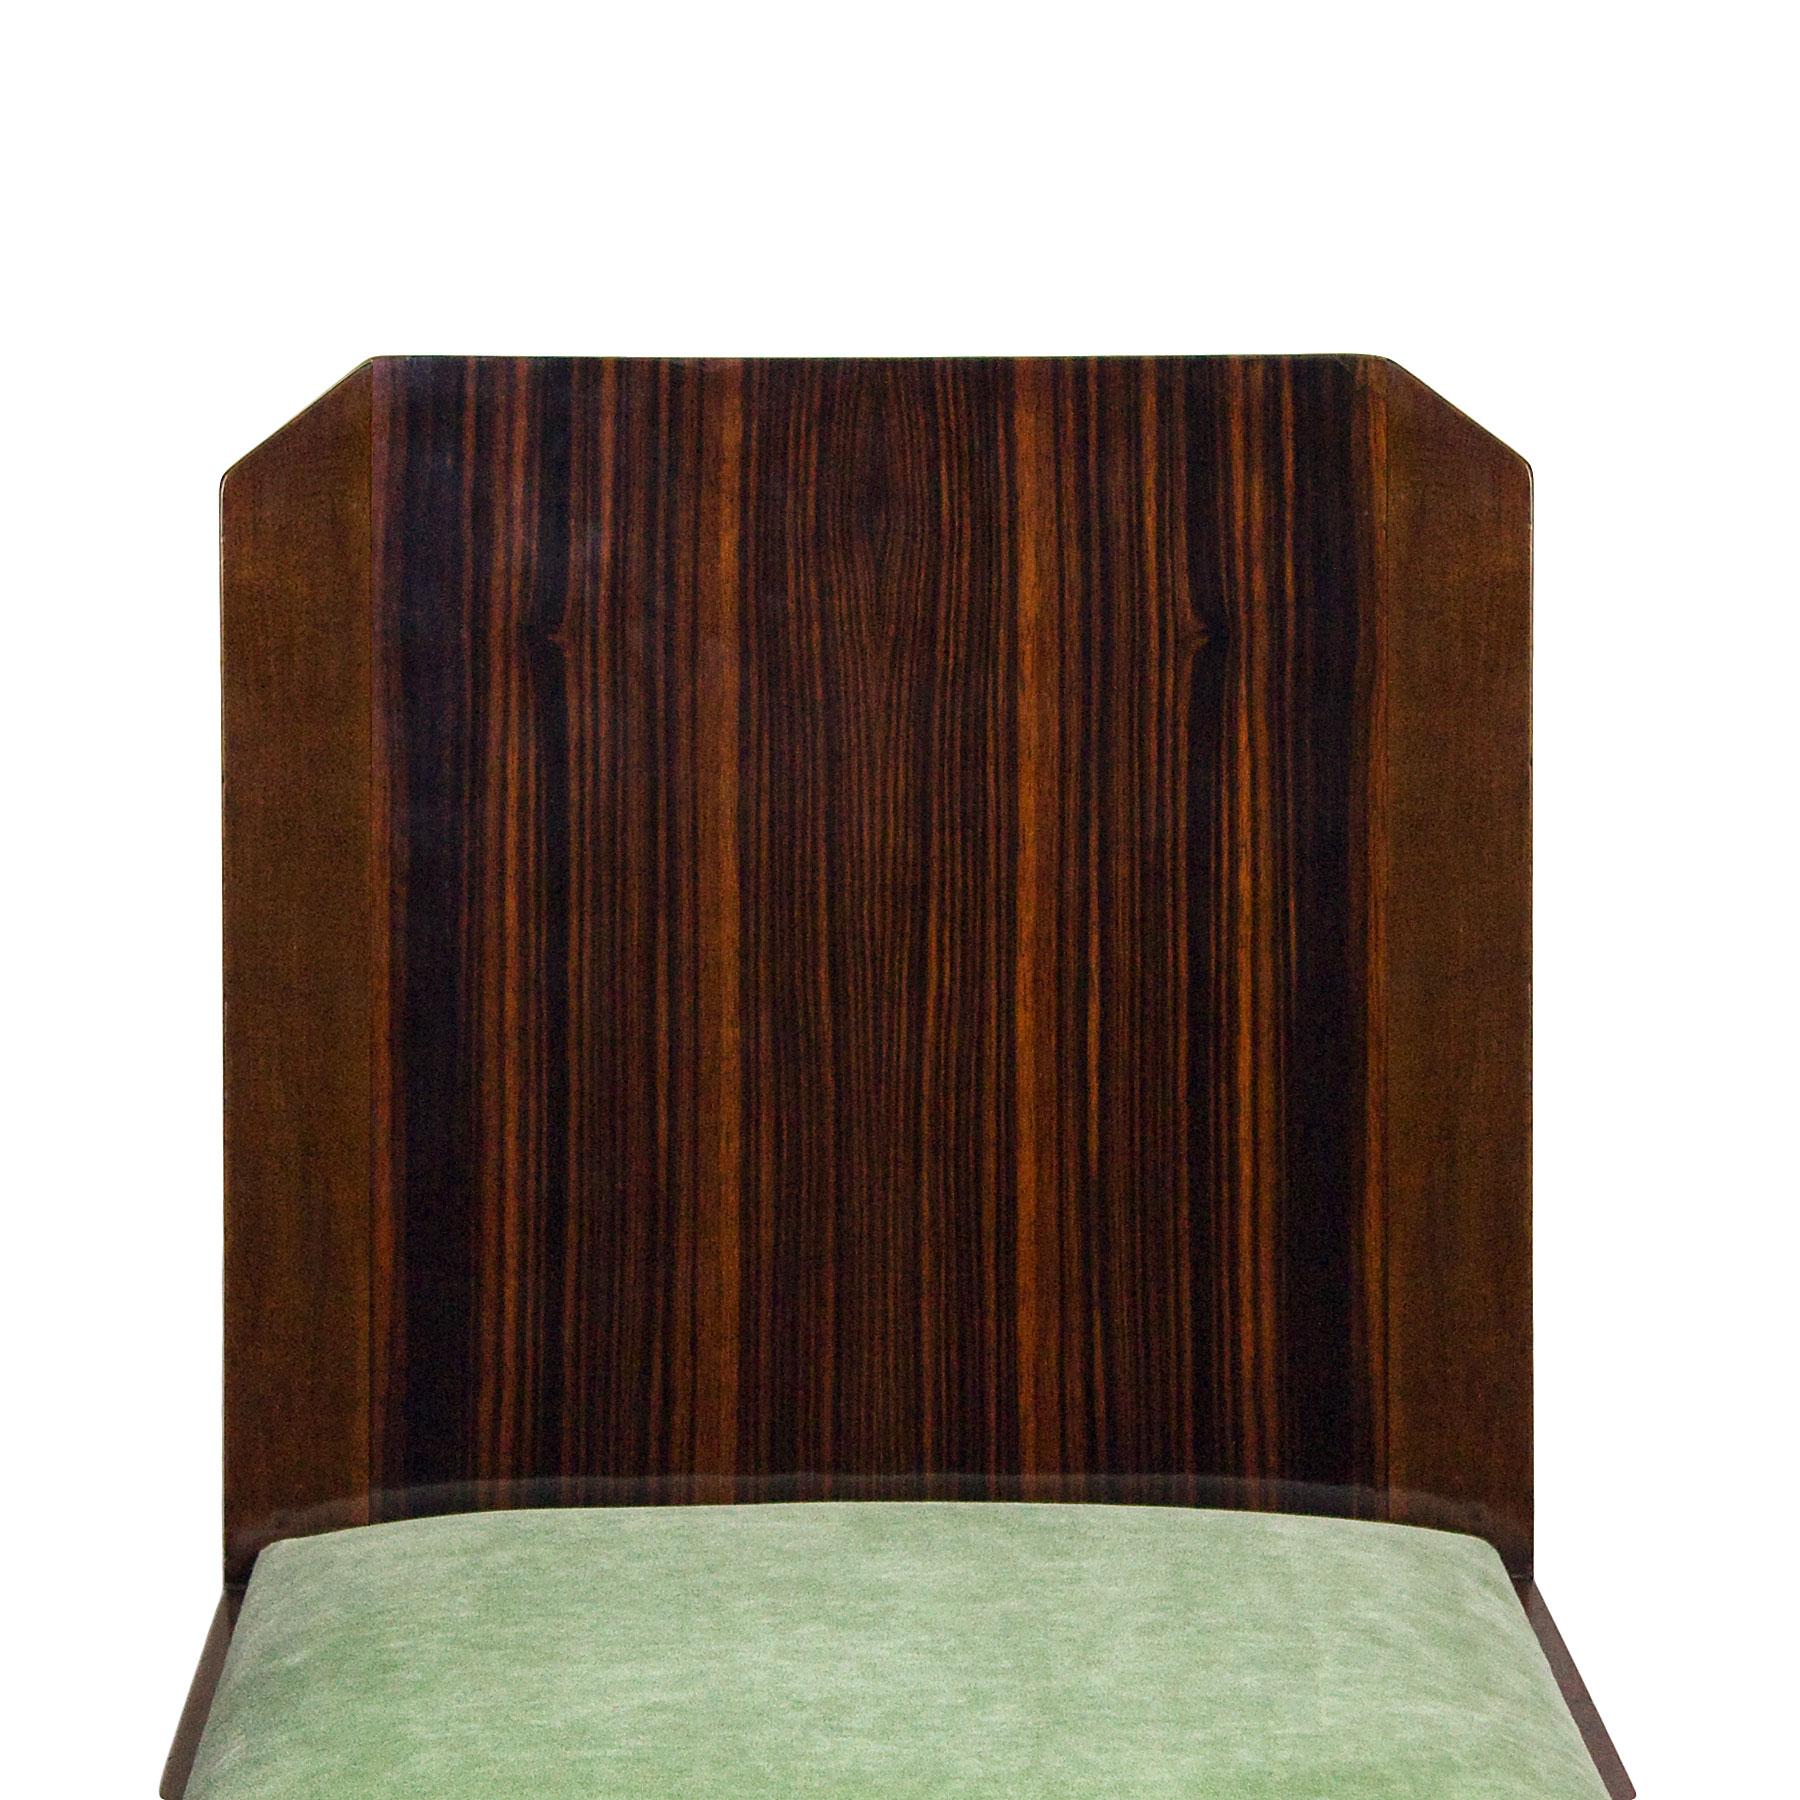 Set of Six Art Deco Chairs in Walnut, Macassar Veneer and Velvet - France, 1930s In Good Condition For Sale In Girona, ES